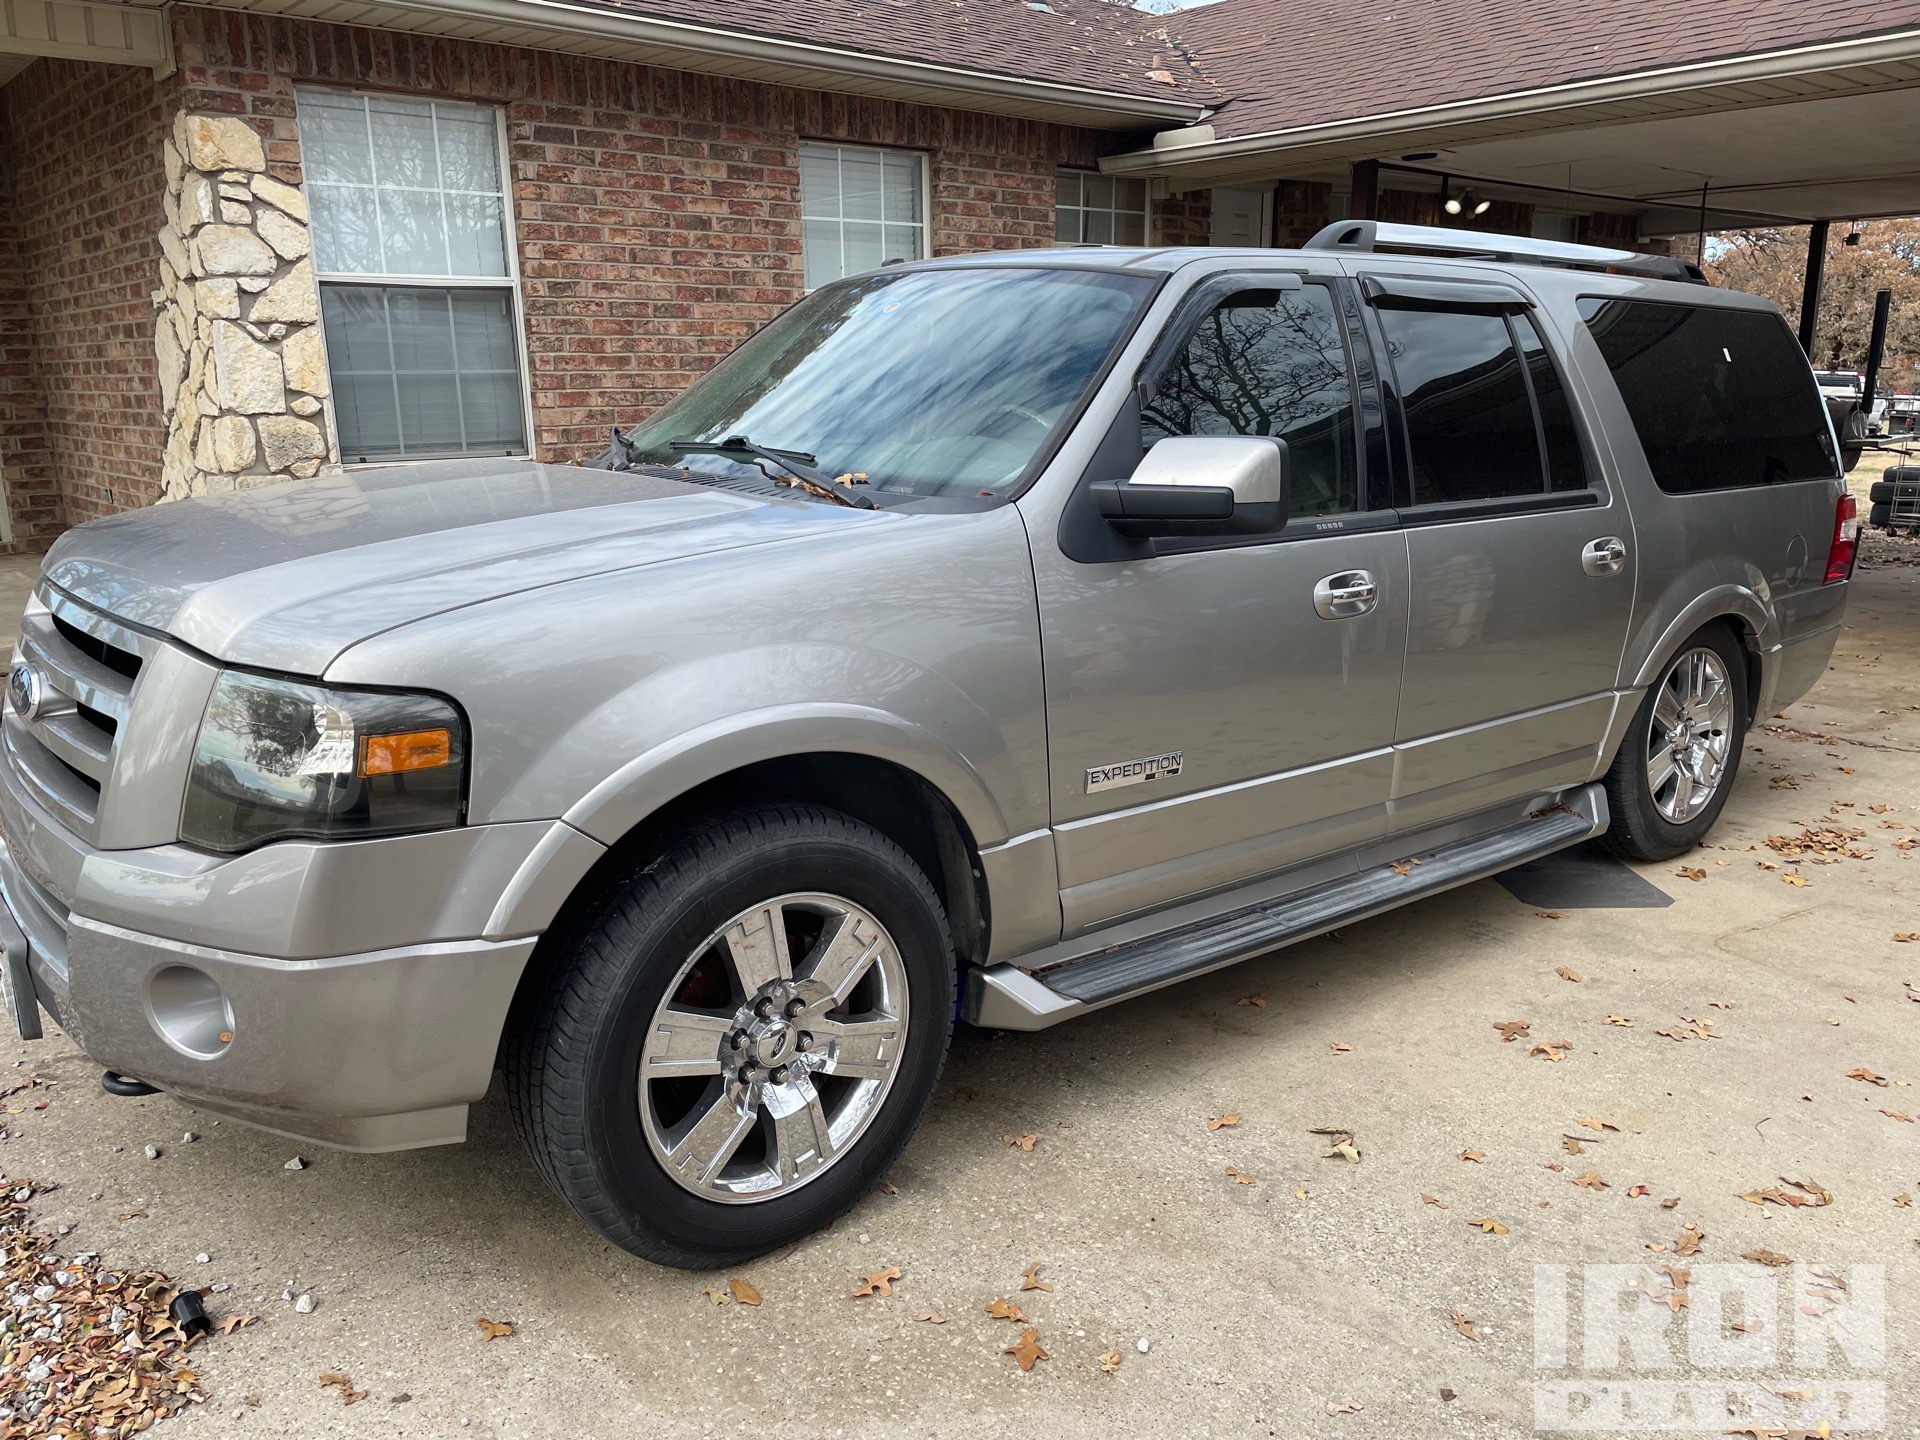 2008 Ford Expedition EL Limited Texas edition 4WD SUV in Aubrey, Texas,  United States (TruckPlanet Item #8499161)